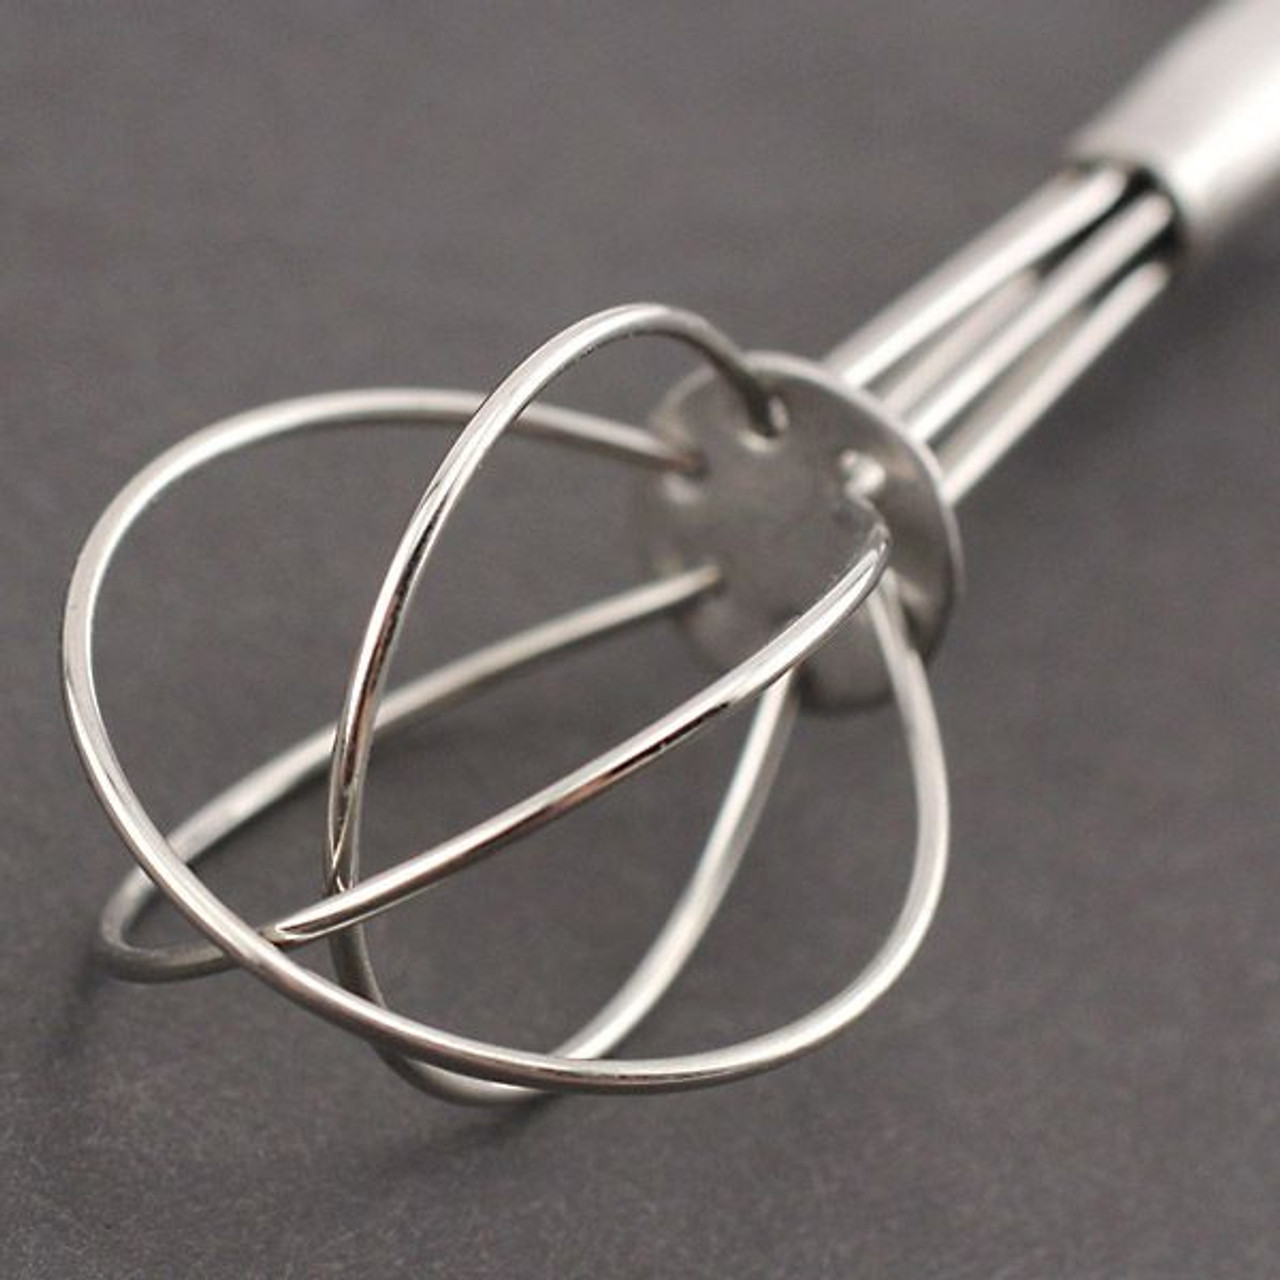 https://cdn11.bigcommerce.com/s-cznxq08r7/images/stencil/1280x1280/products/309/2406/23670-mini-stainless-steal-whisk-b2_1__76046.1590767920.jpg?c=1